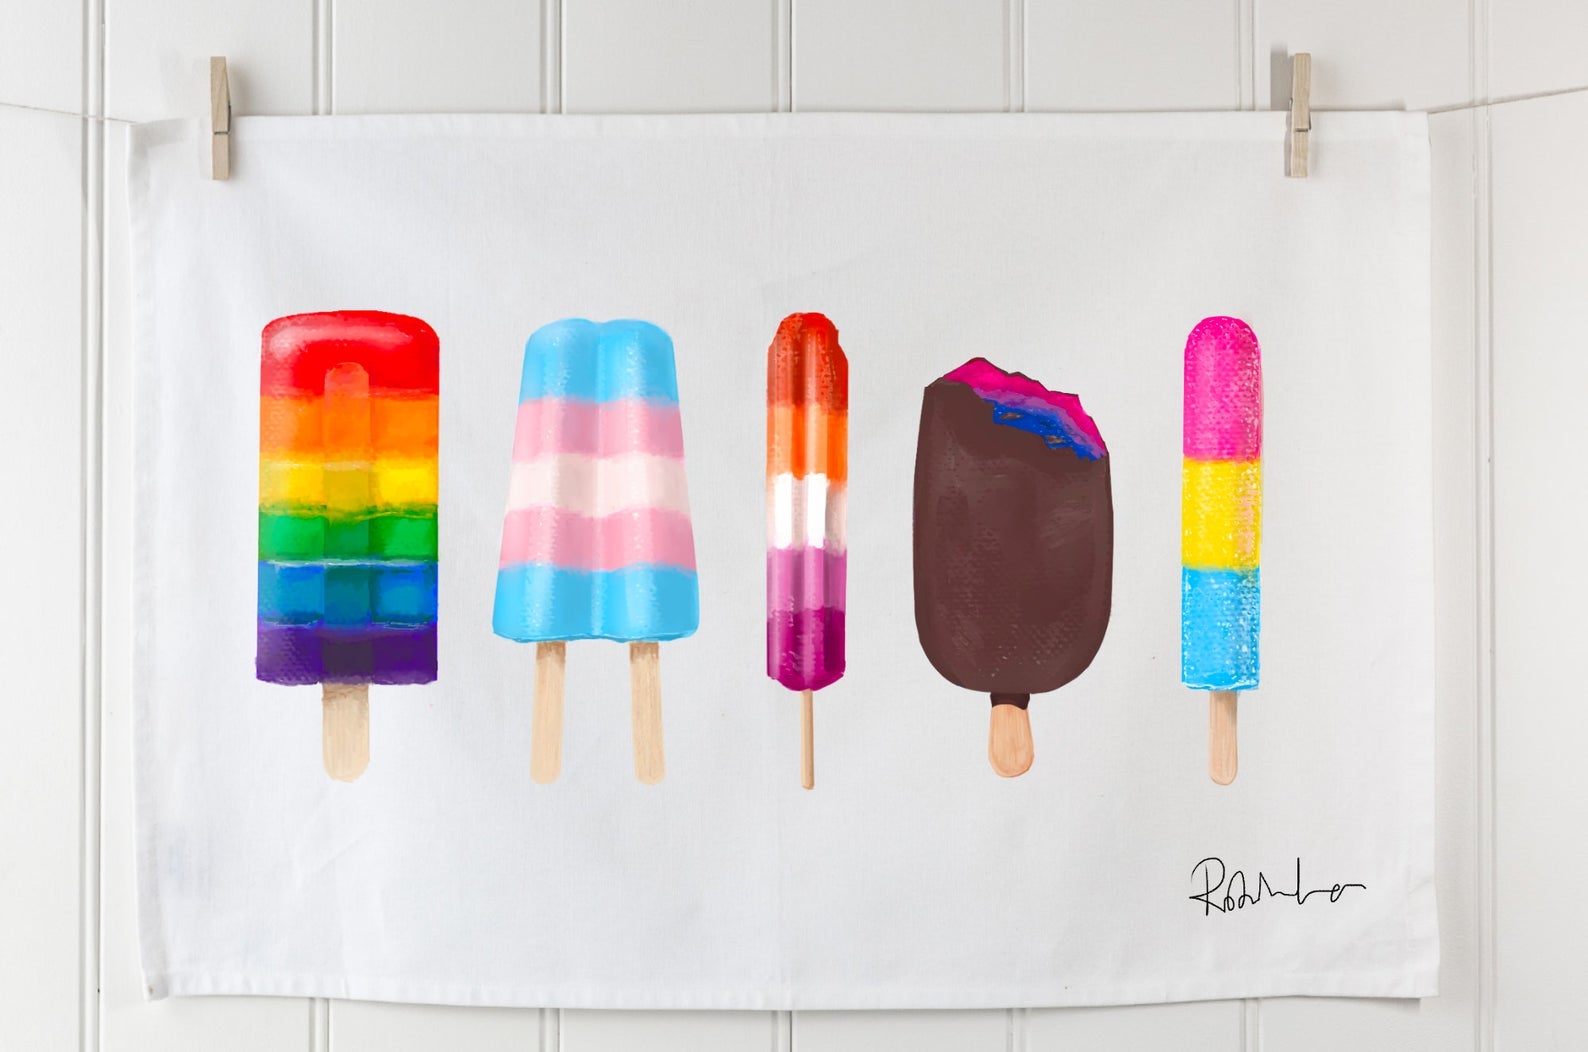 white tea towel with illustrations of popsicles with various pride flag prints and the artist's signature in black in the bottom right corner